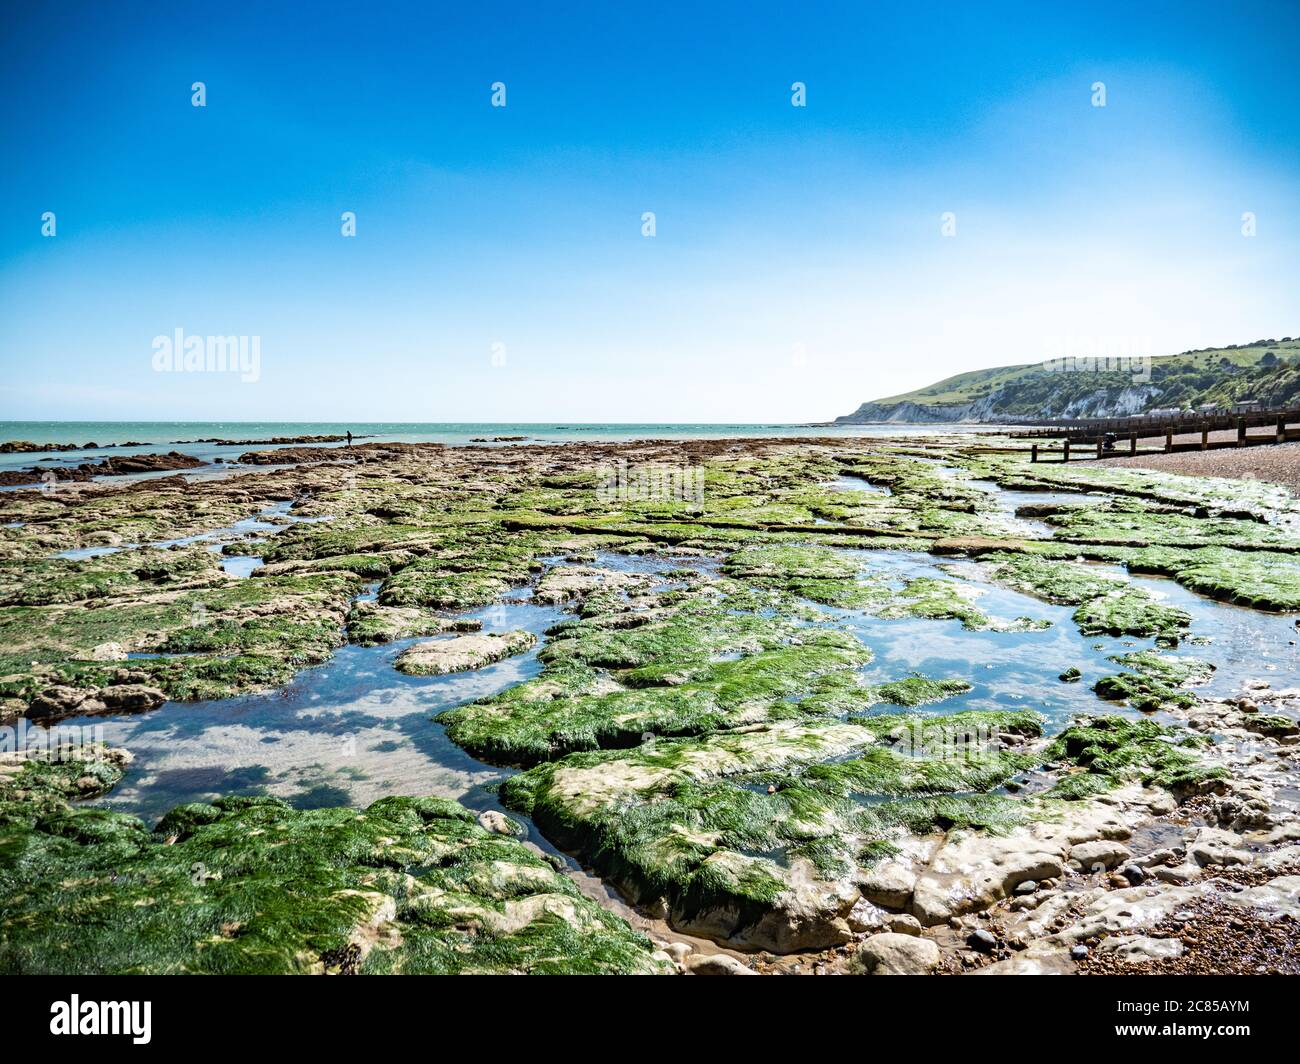 Rock pools at low tide on the south coast of England near Eastbourne, East Sussex, with the white cliffs and South Downs visible in the distance. Stock Photo